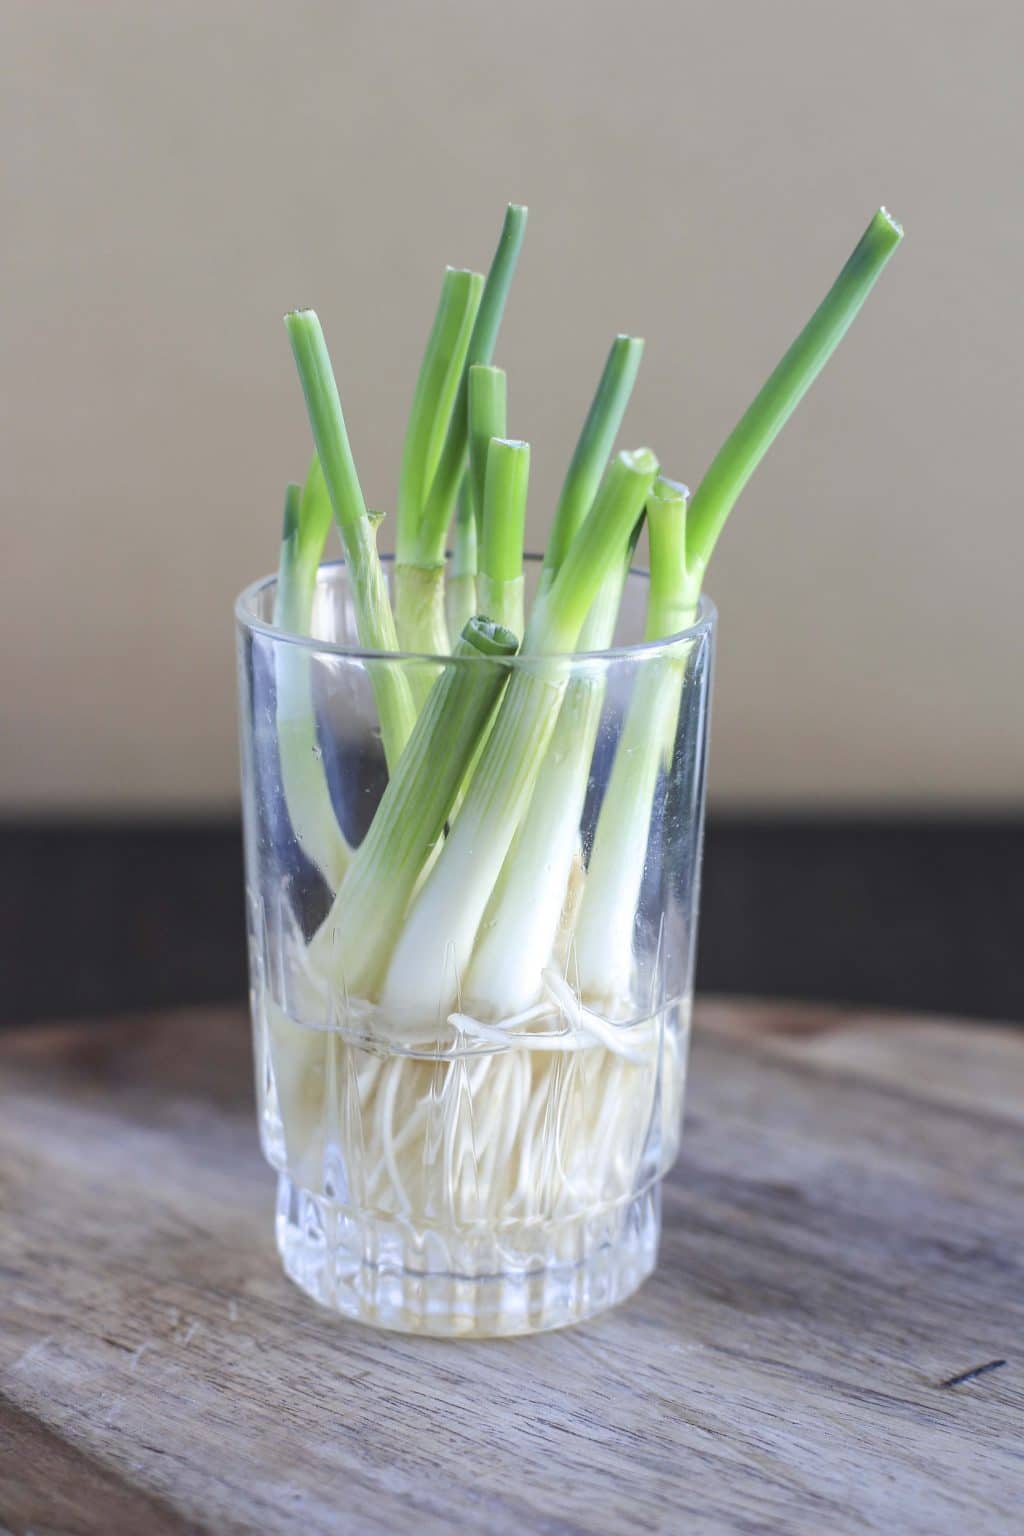 A small glass cup filled with green onions roots on a wooden platter.